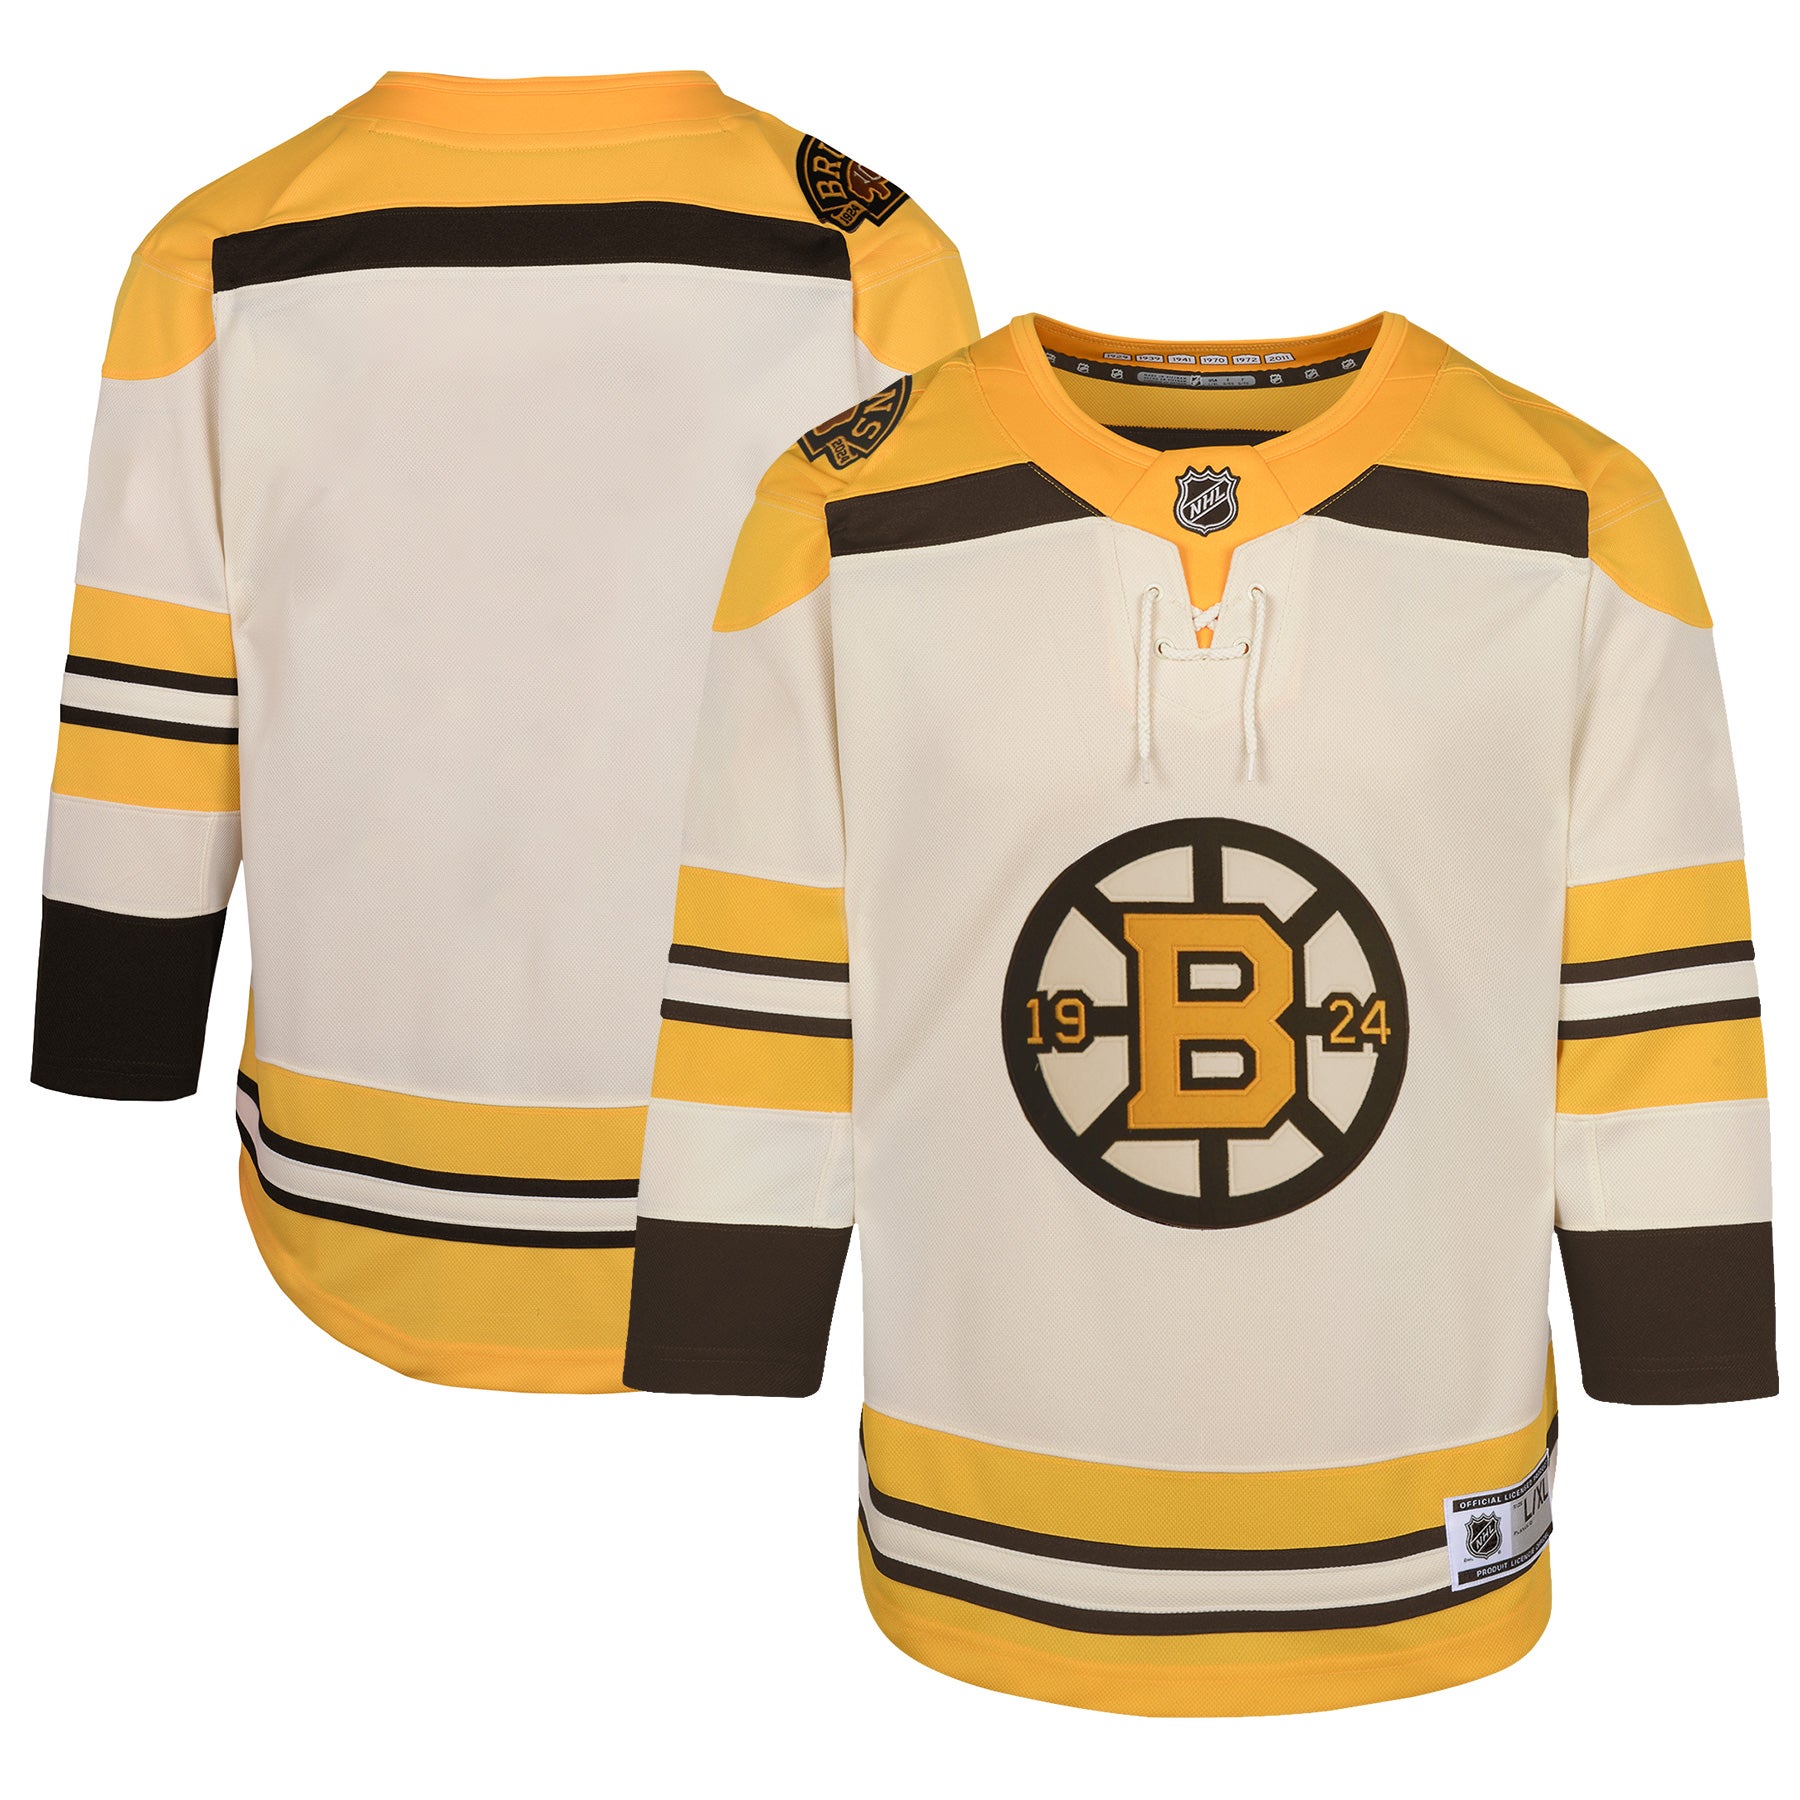 Outerstuff Pittsburgh Penguins - Premier Replica Jersey - Third - Youth